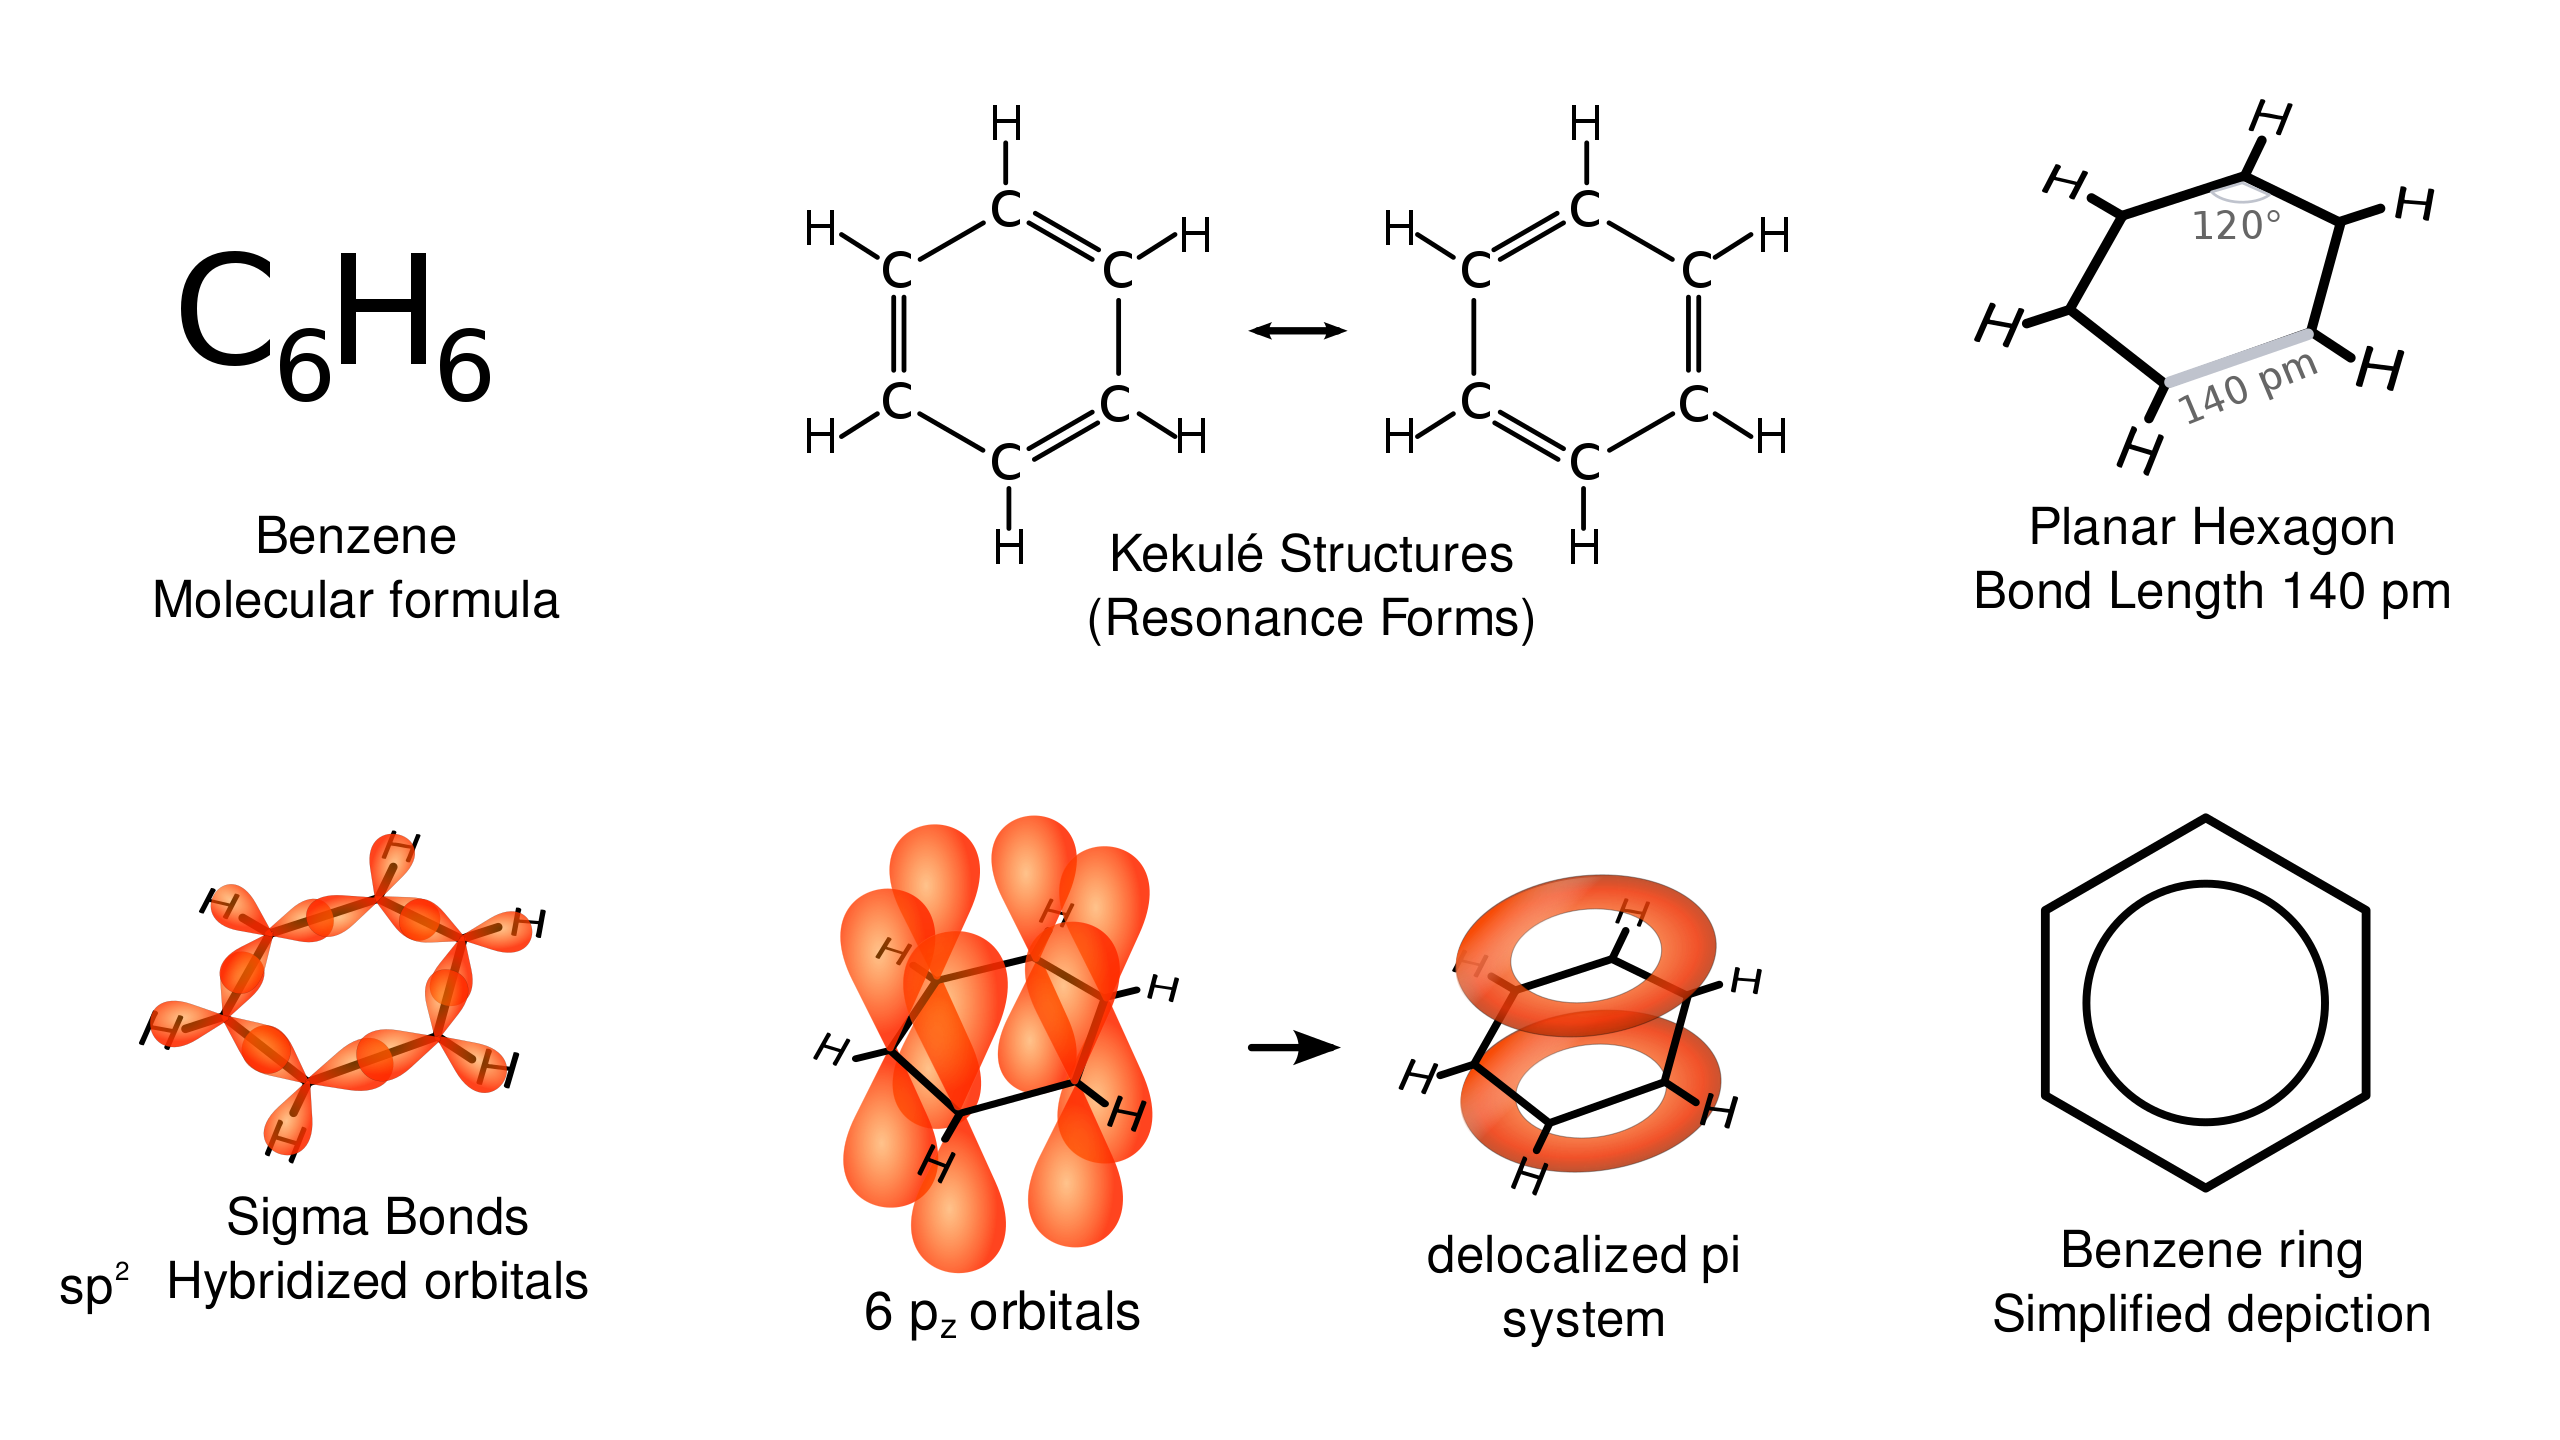 Various representations of Benzene. Source: Wikipedia Commons.